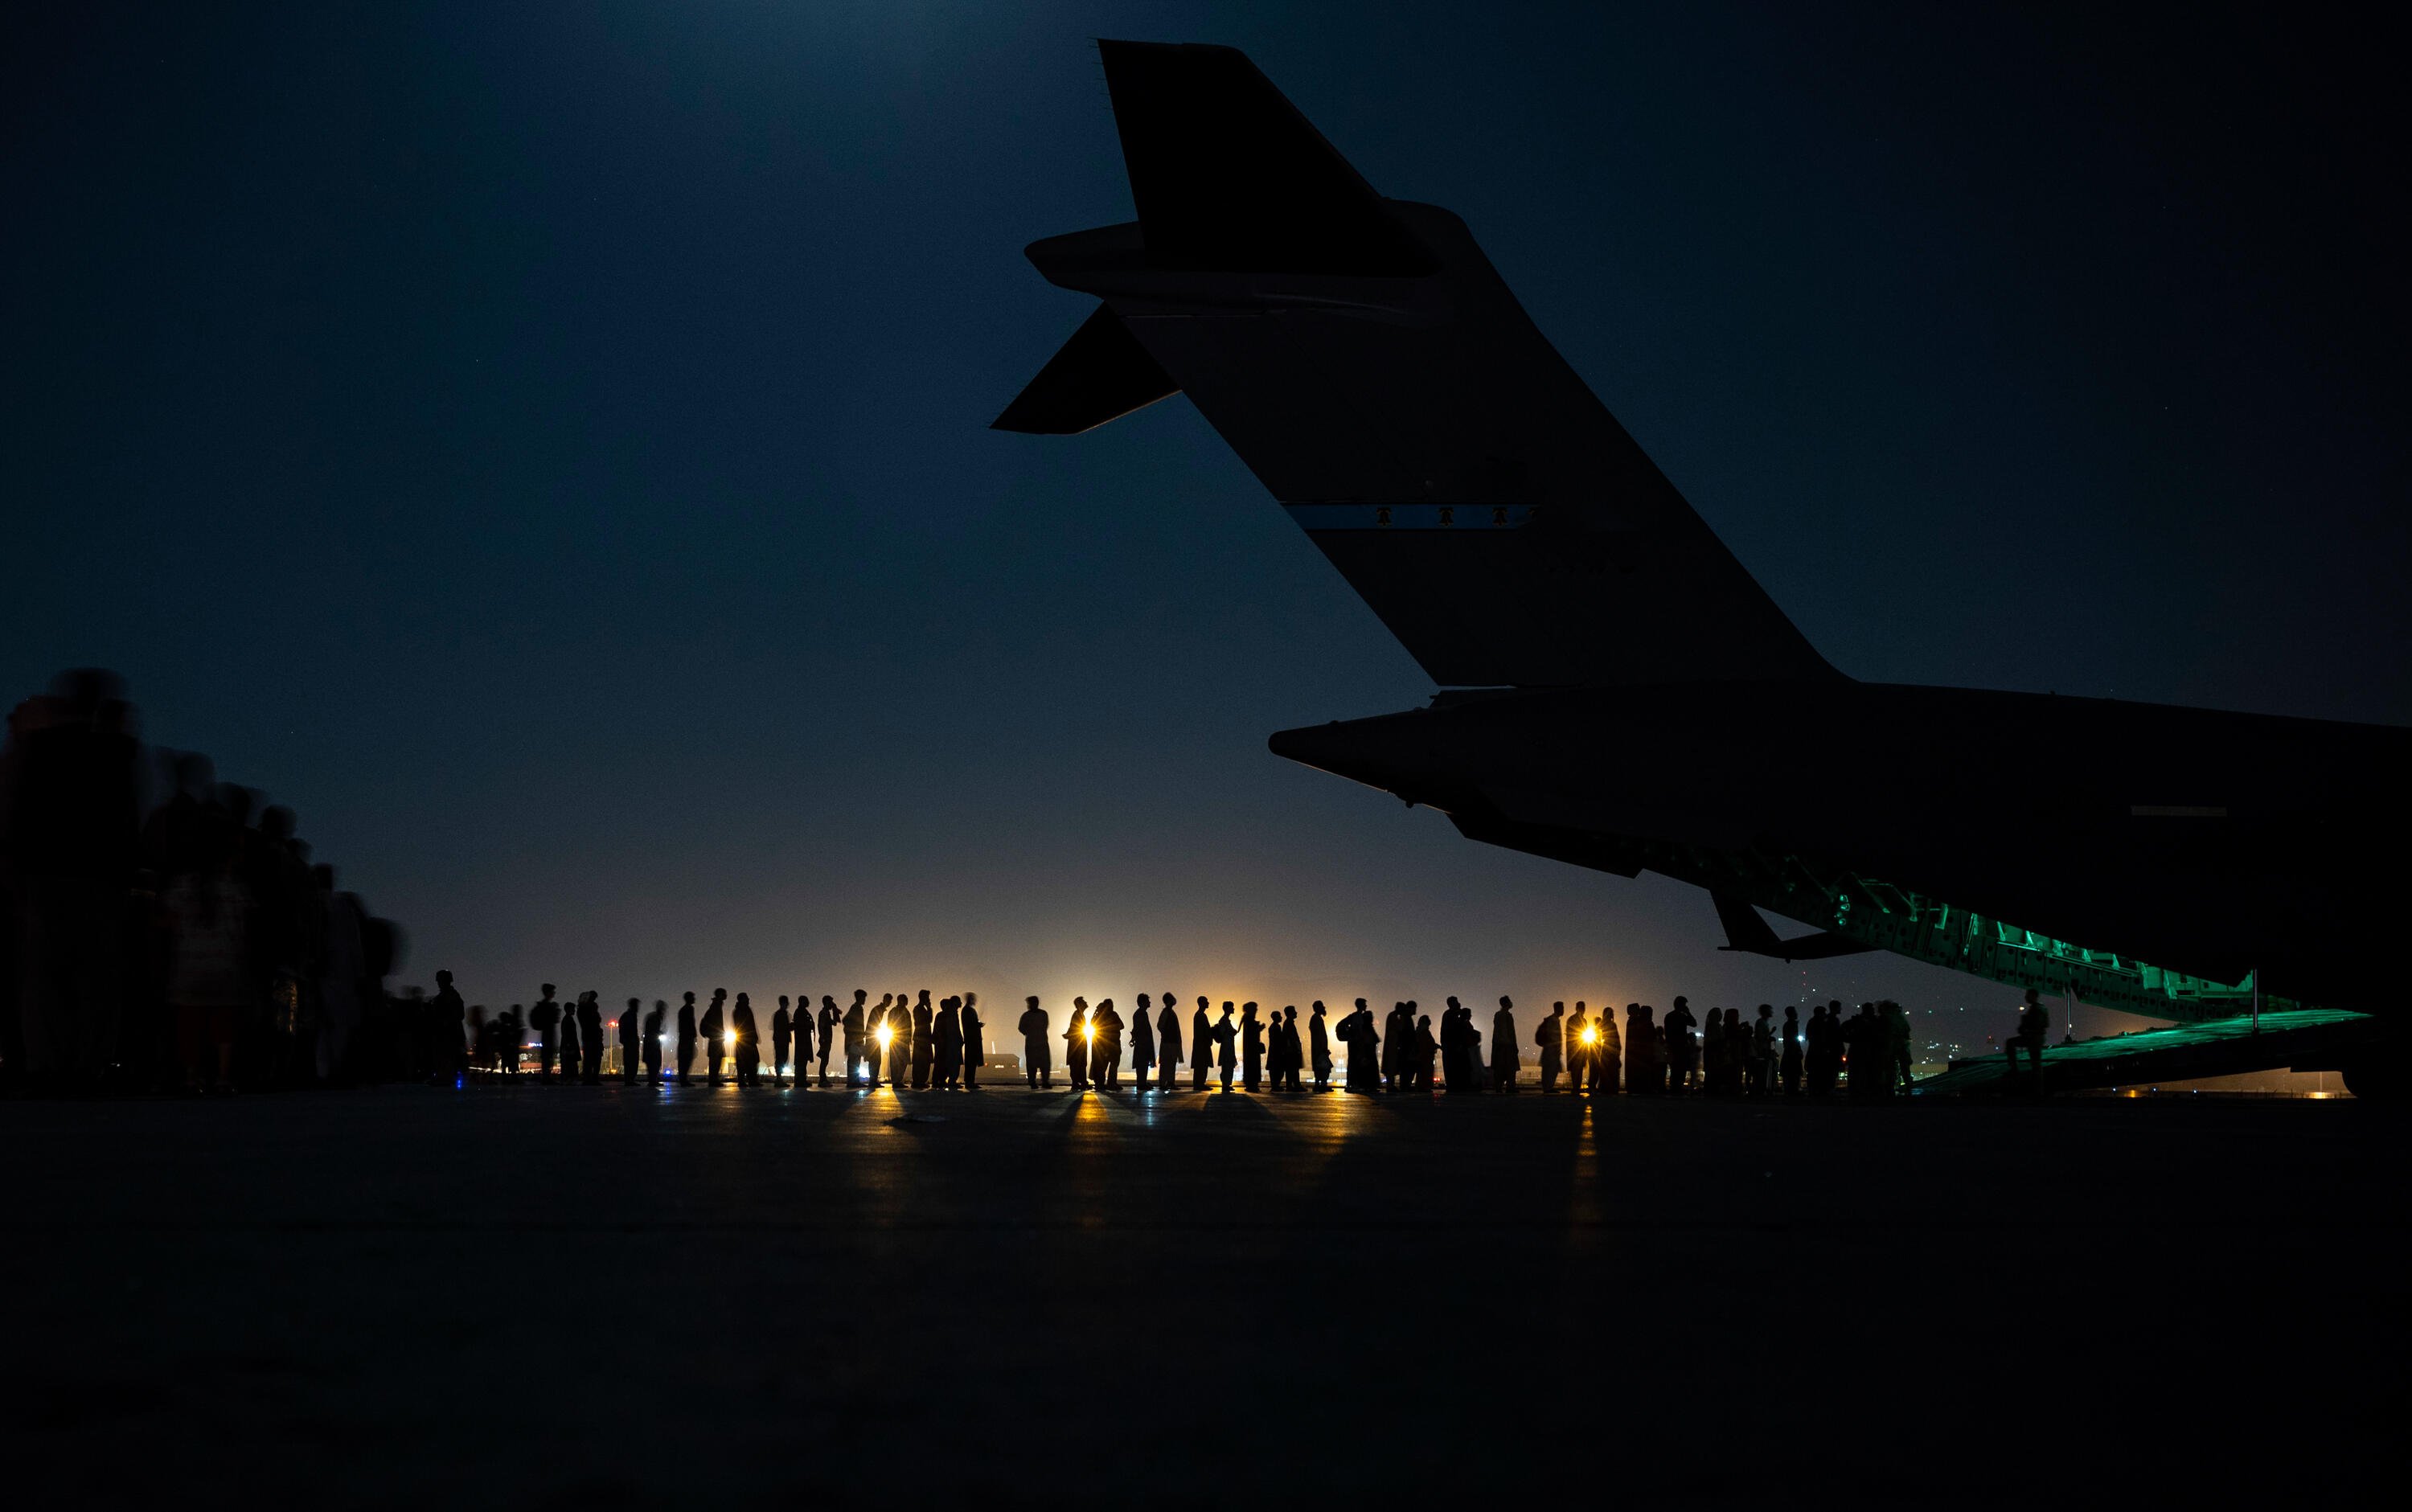 A night shot, with the tail of an airplane in the foreground and a line of people in the background. We can see a light in the distance and just the silhouette of the plane and people. 